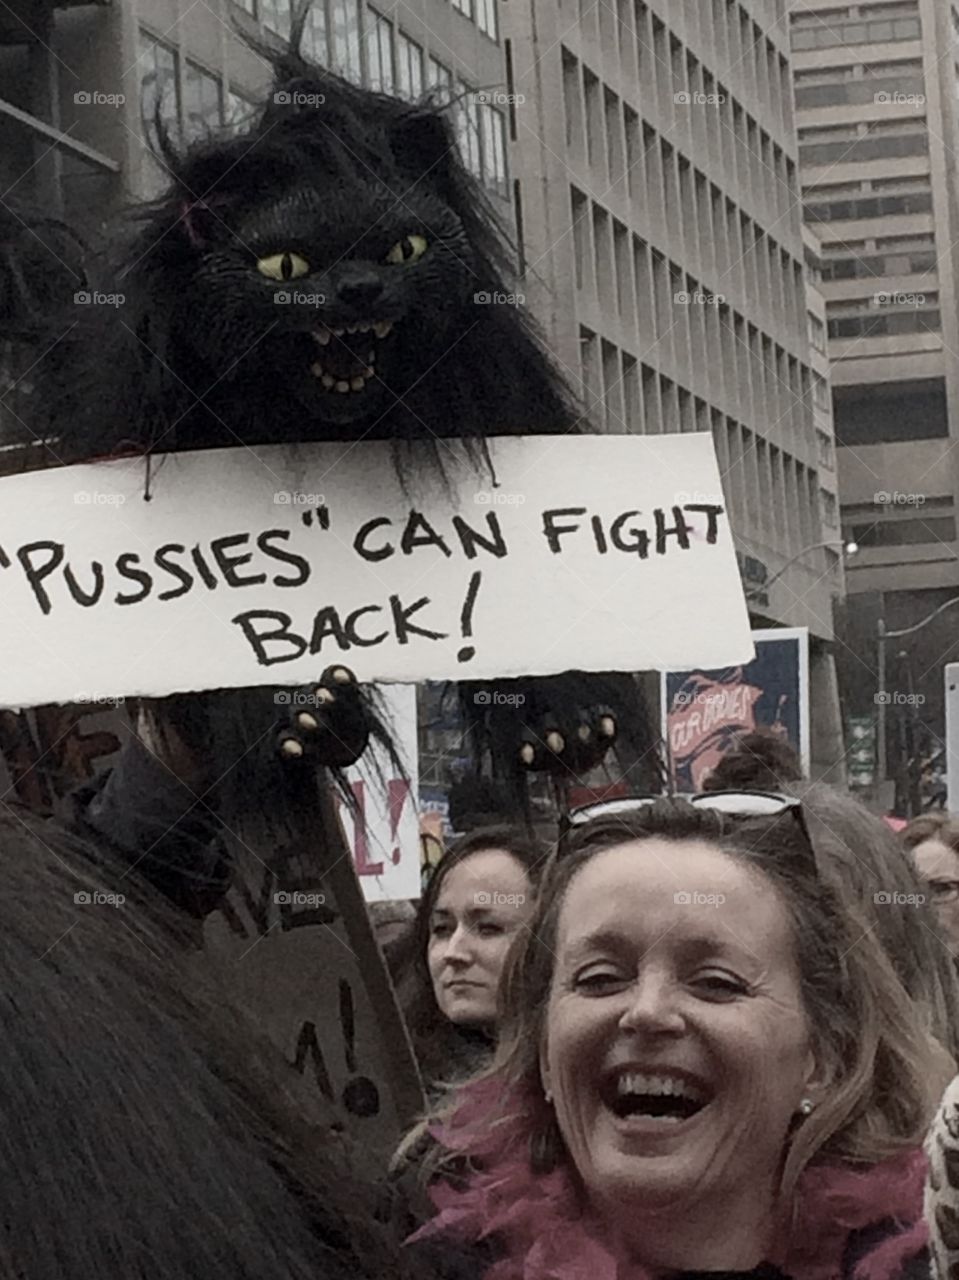 Pussies can fight back 2